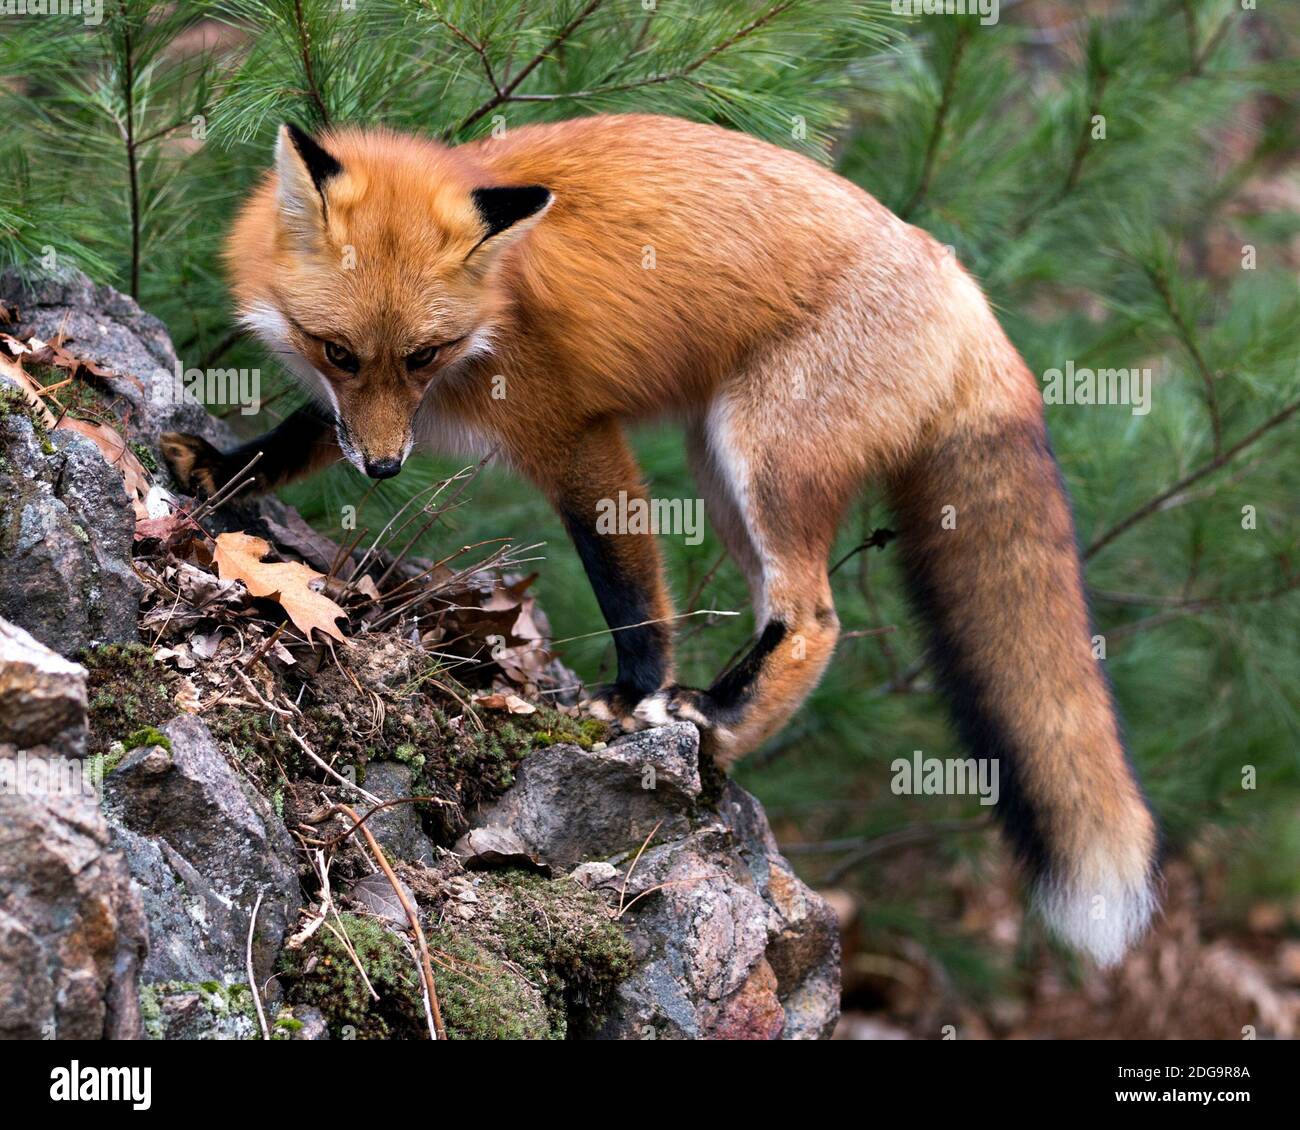 Red fox close-up profile view standing on a big moss rock with a pine tree background in its environment and habitat displaying fox tail, bushy tail, Stock Photo